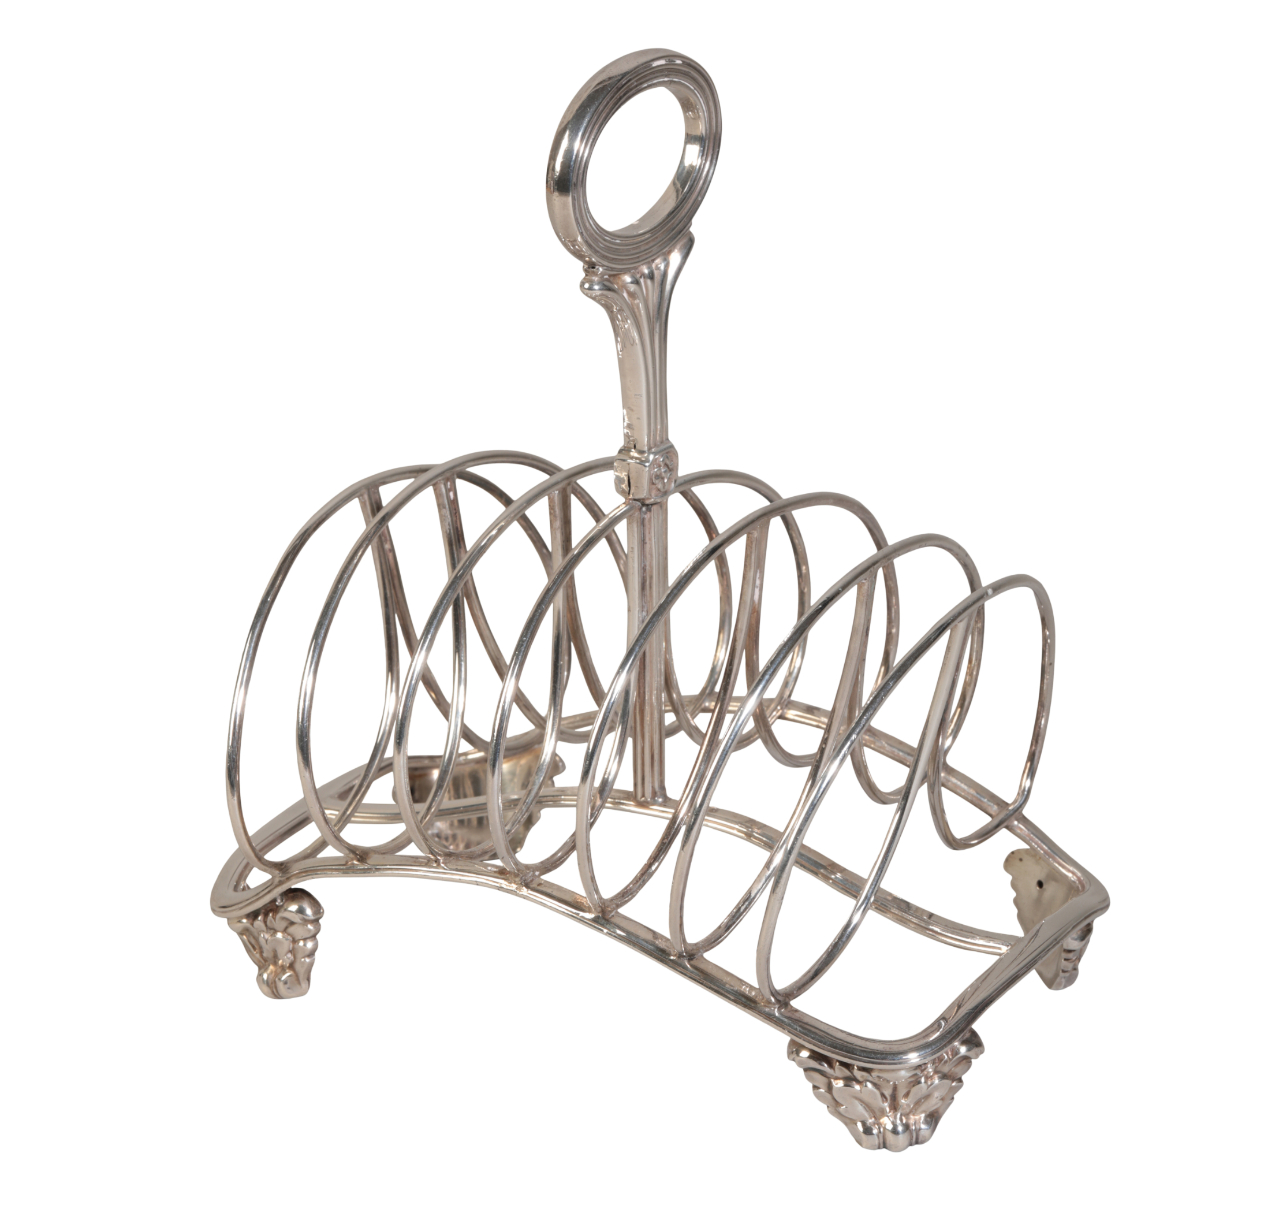 A GEORGE IV SILVER SIX DIVISION TOAST RACK